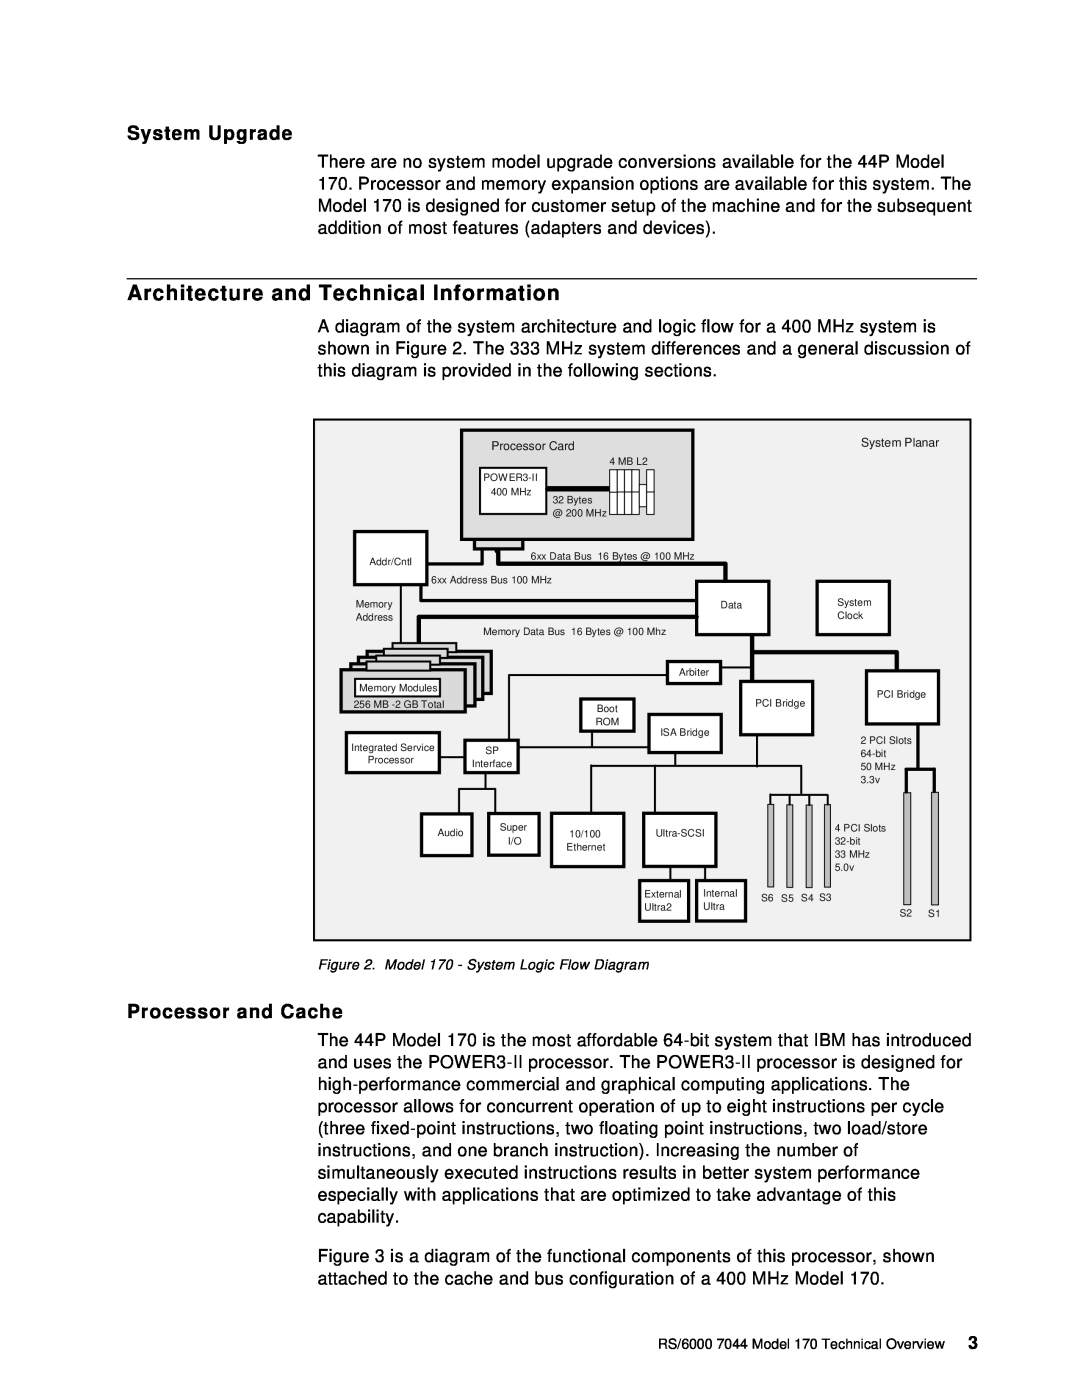 IBM 170 manual Architecture and Technical Information, System Upgrade, Processor and Cache 